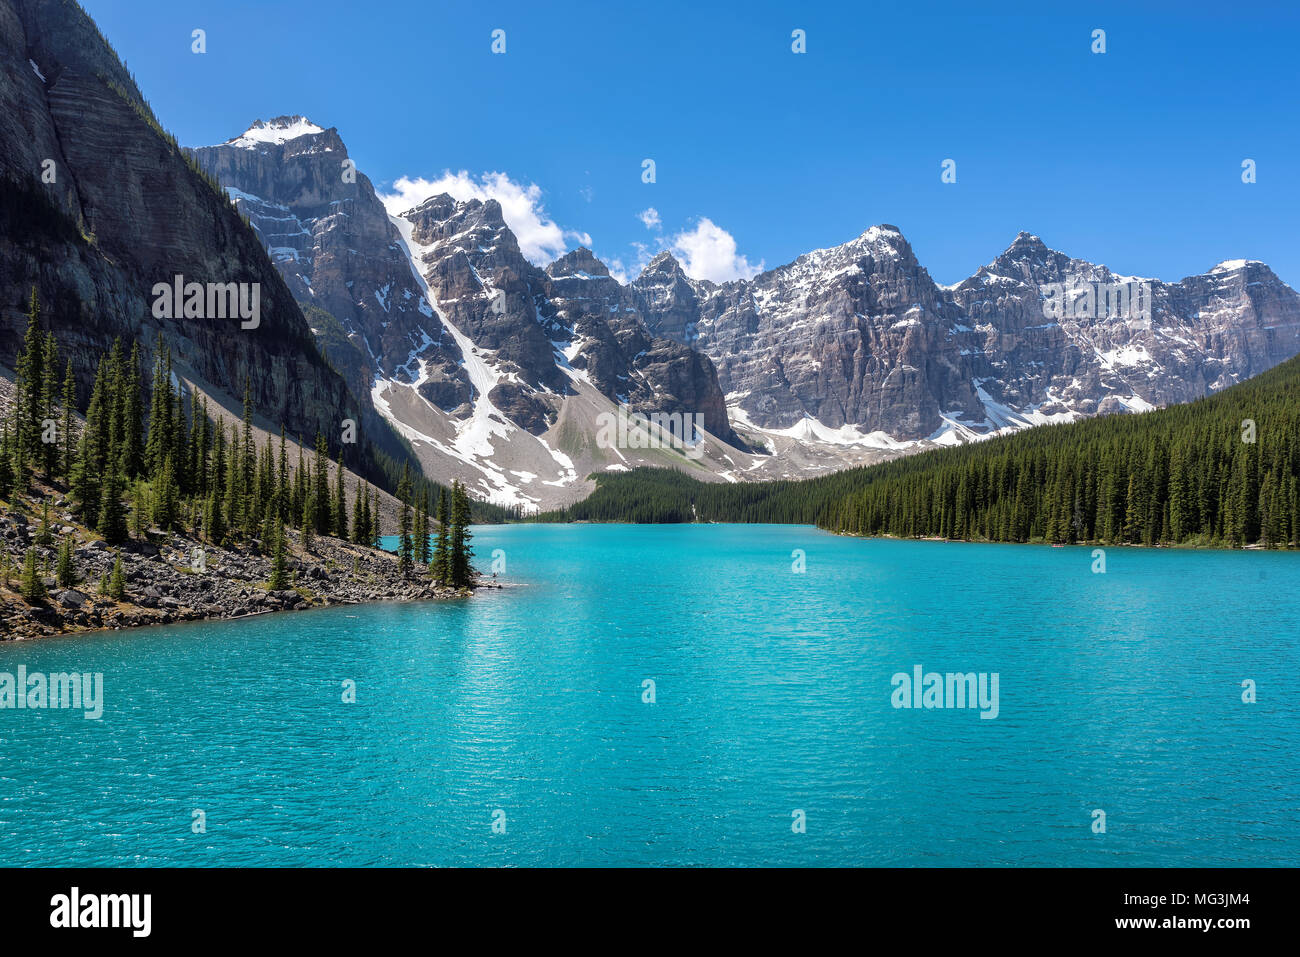 Moraine lake in Canadian Rockies, Banff National Park, Canada. Stock Photo